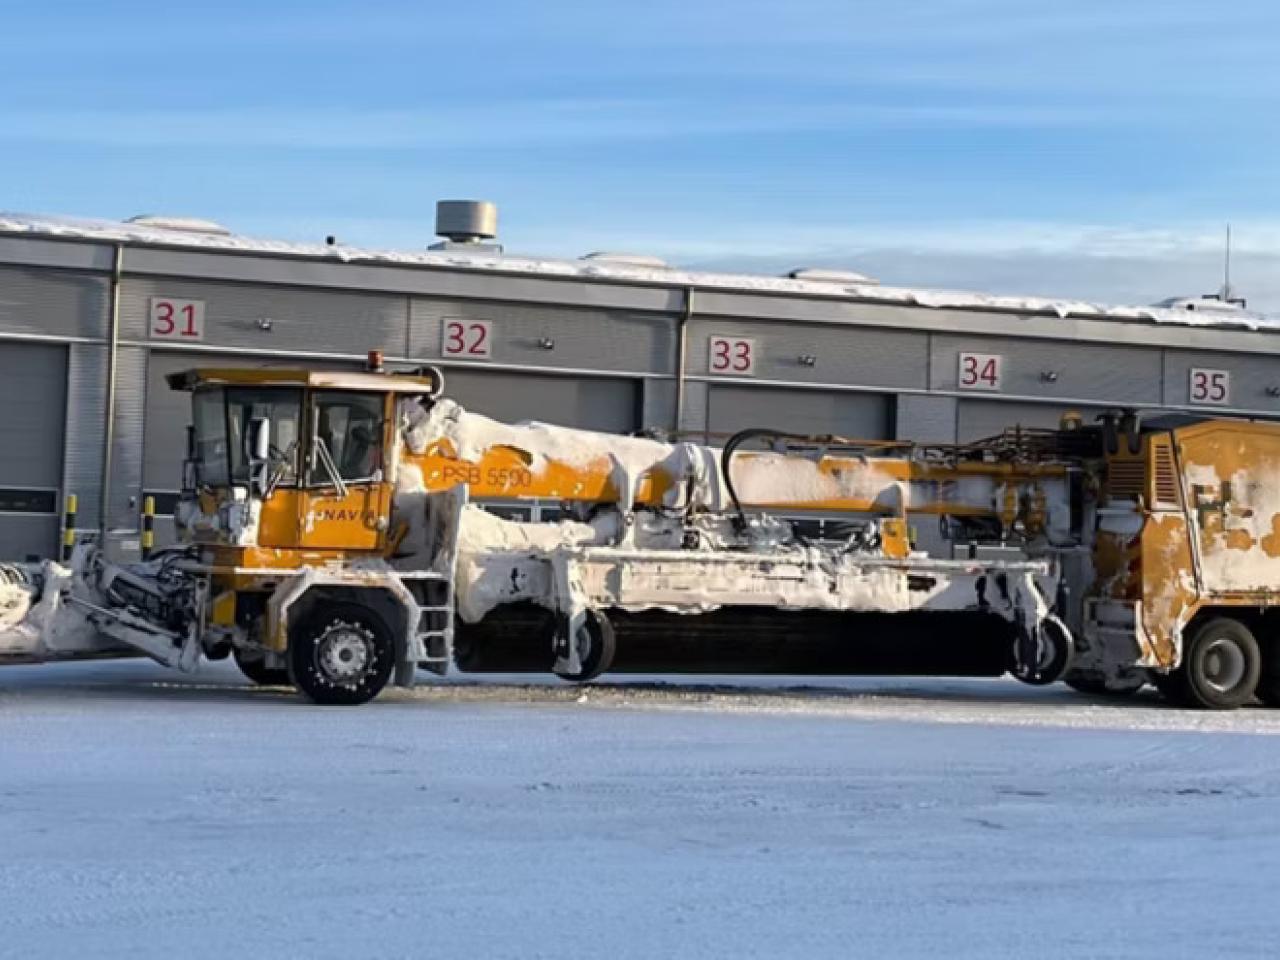 A large de-icing machine outside covered in snow